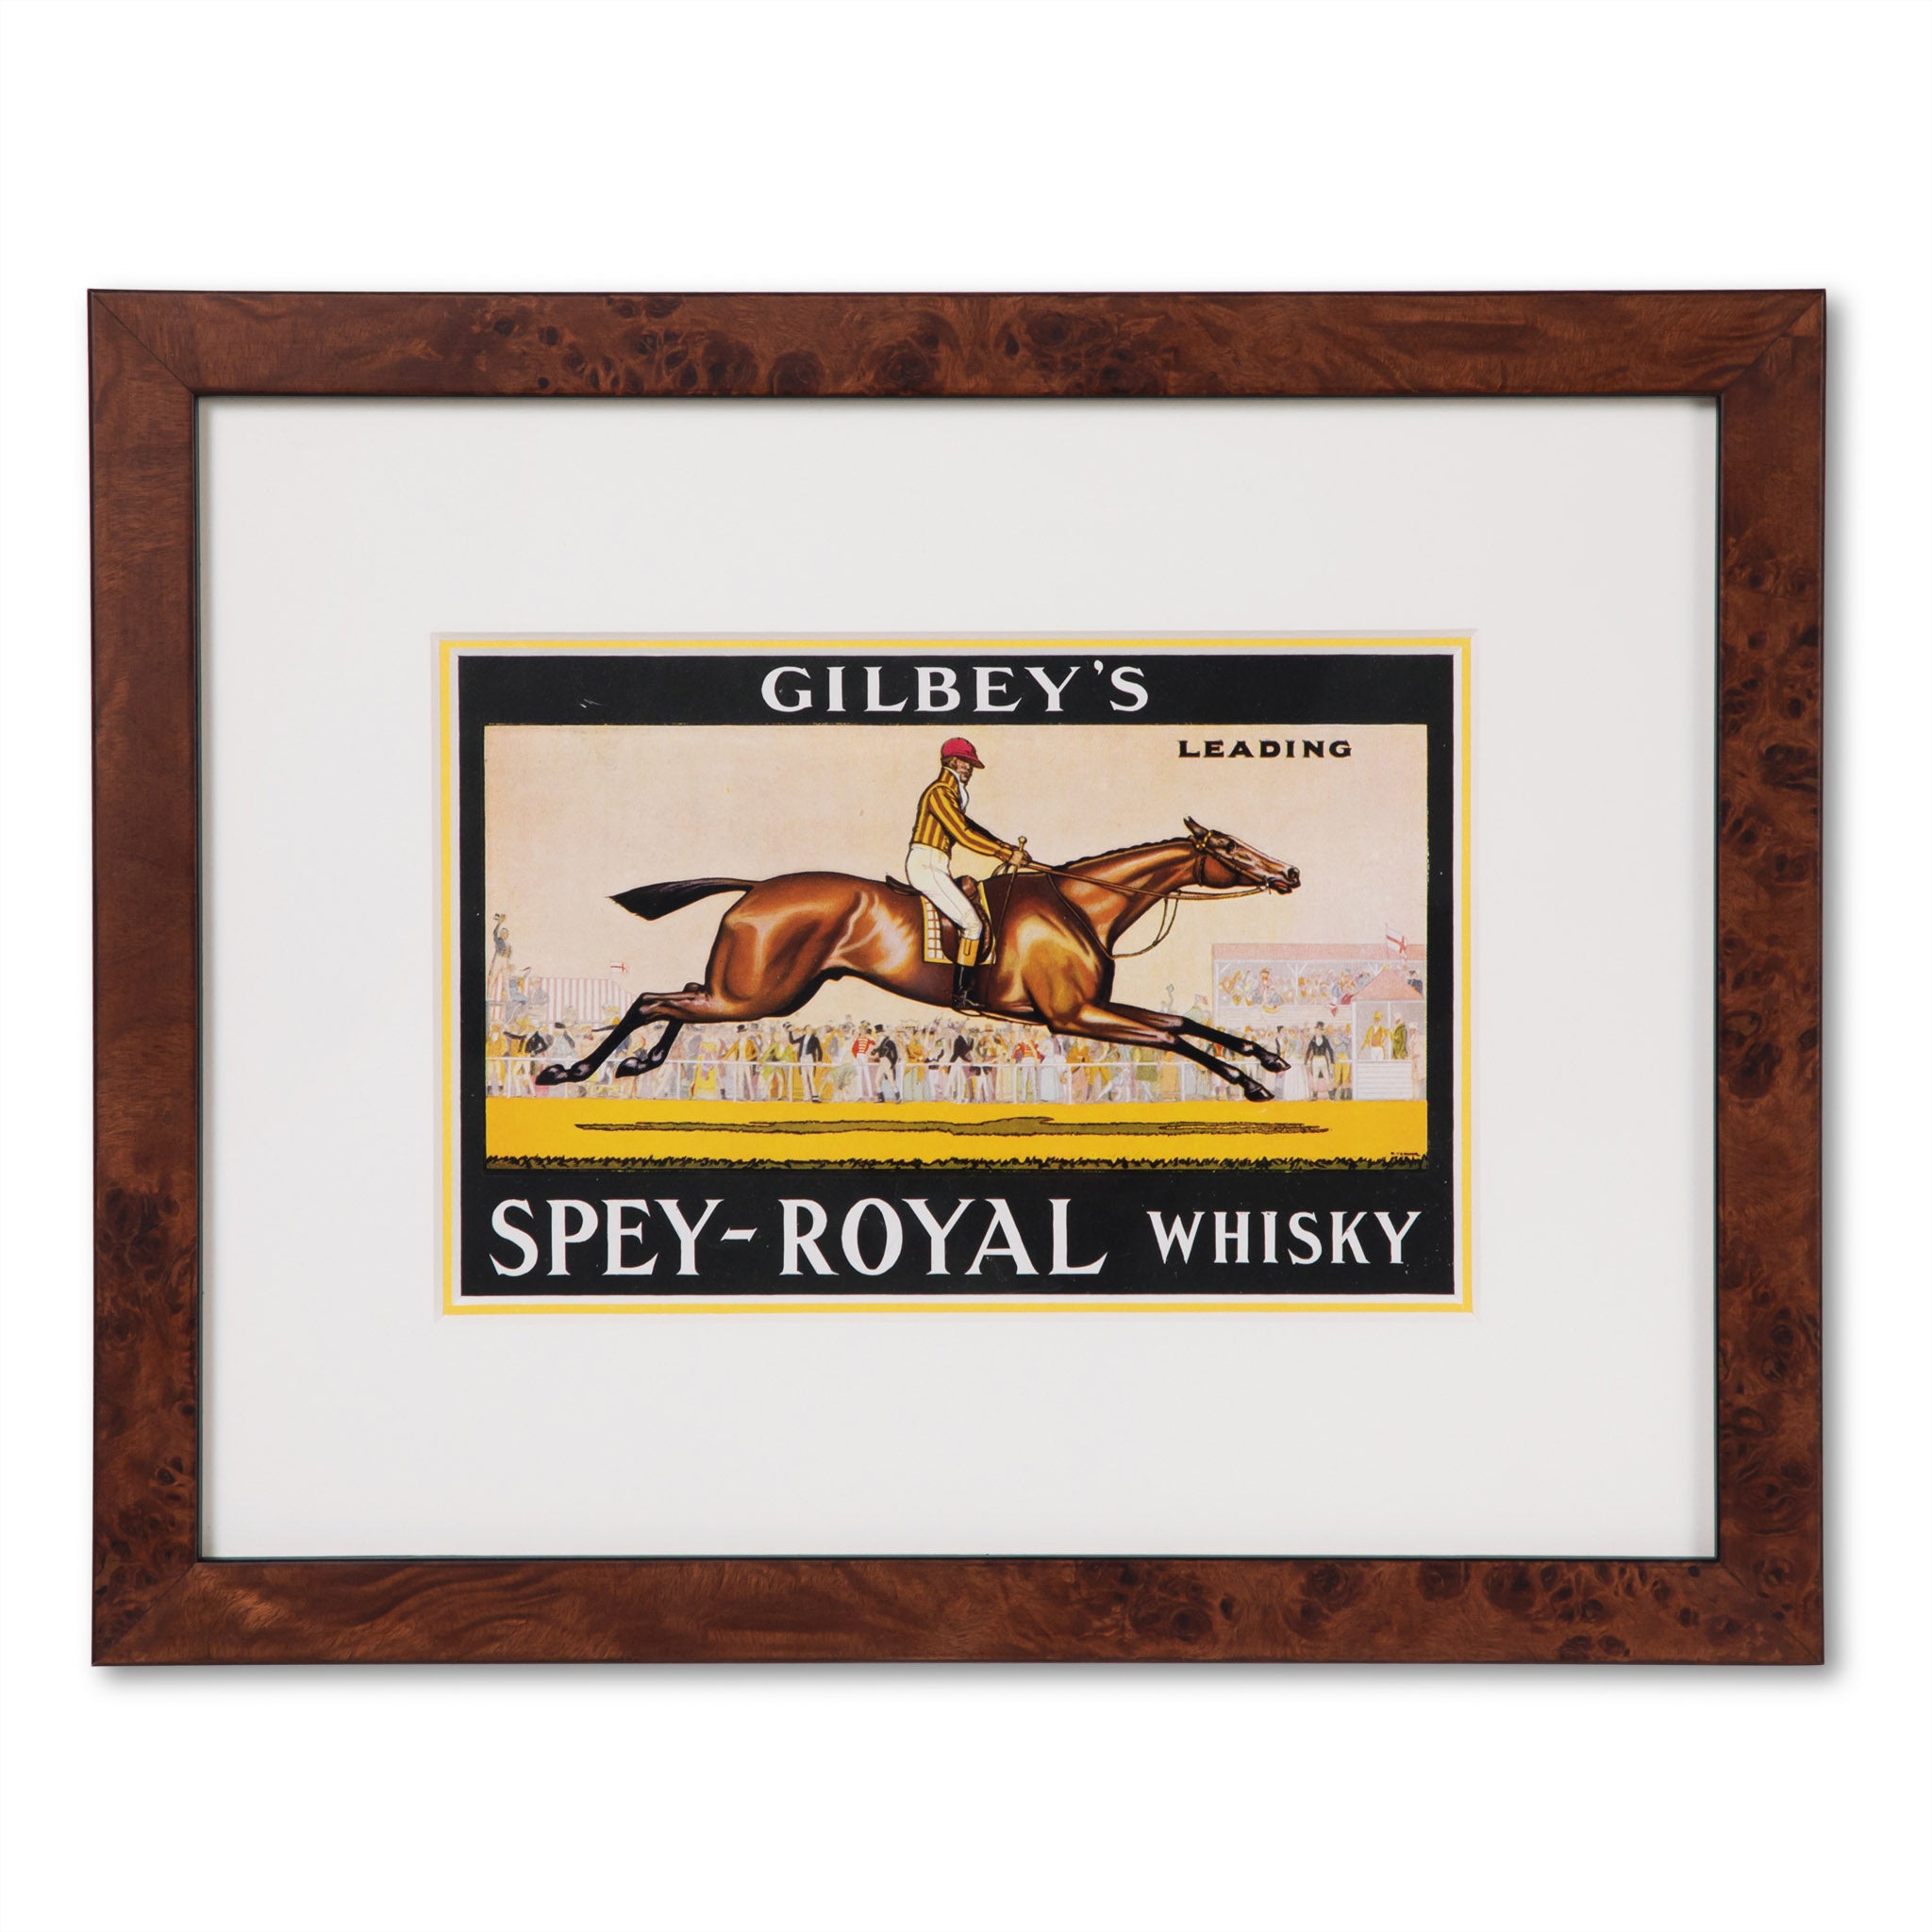 Gilbey's Spey-Royal Whisky Label